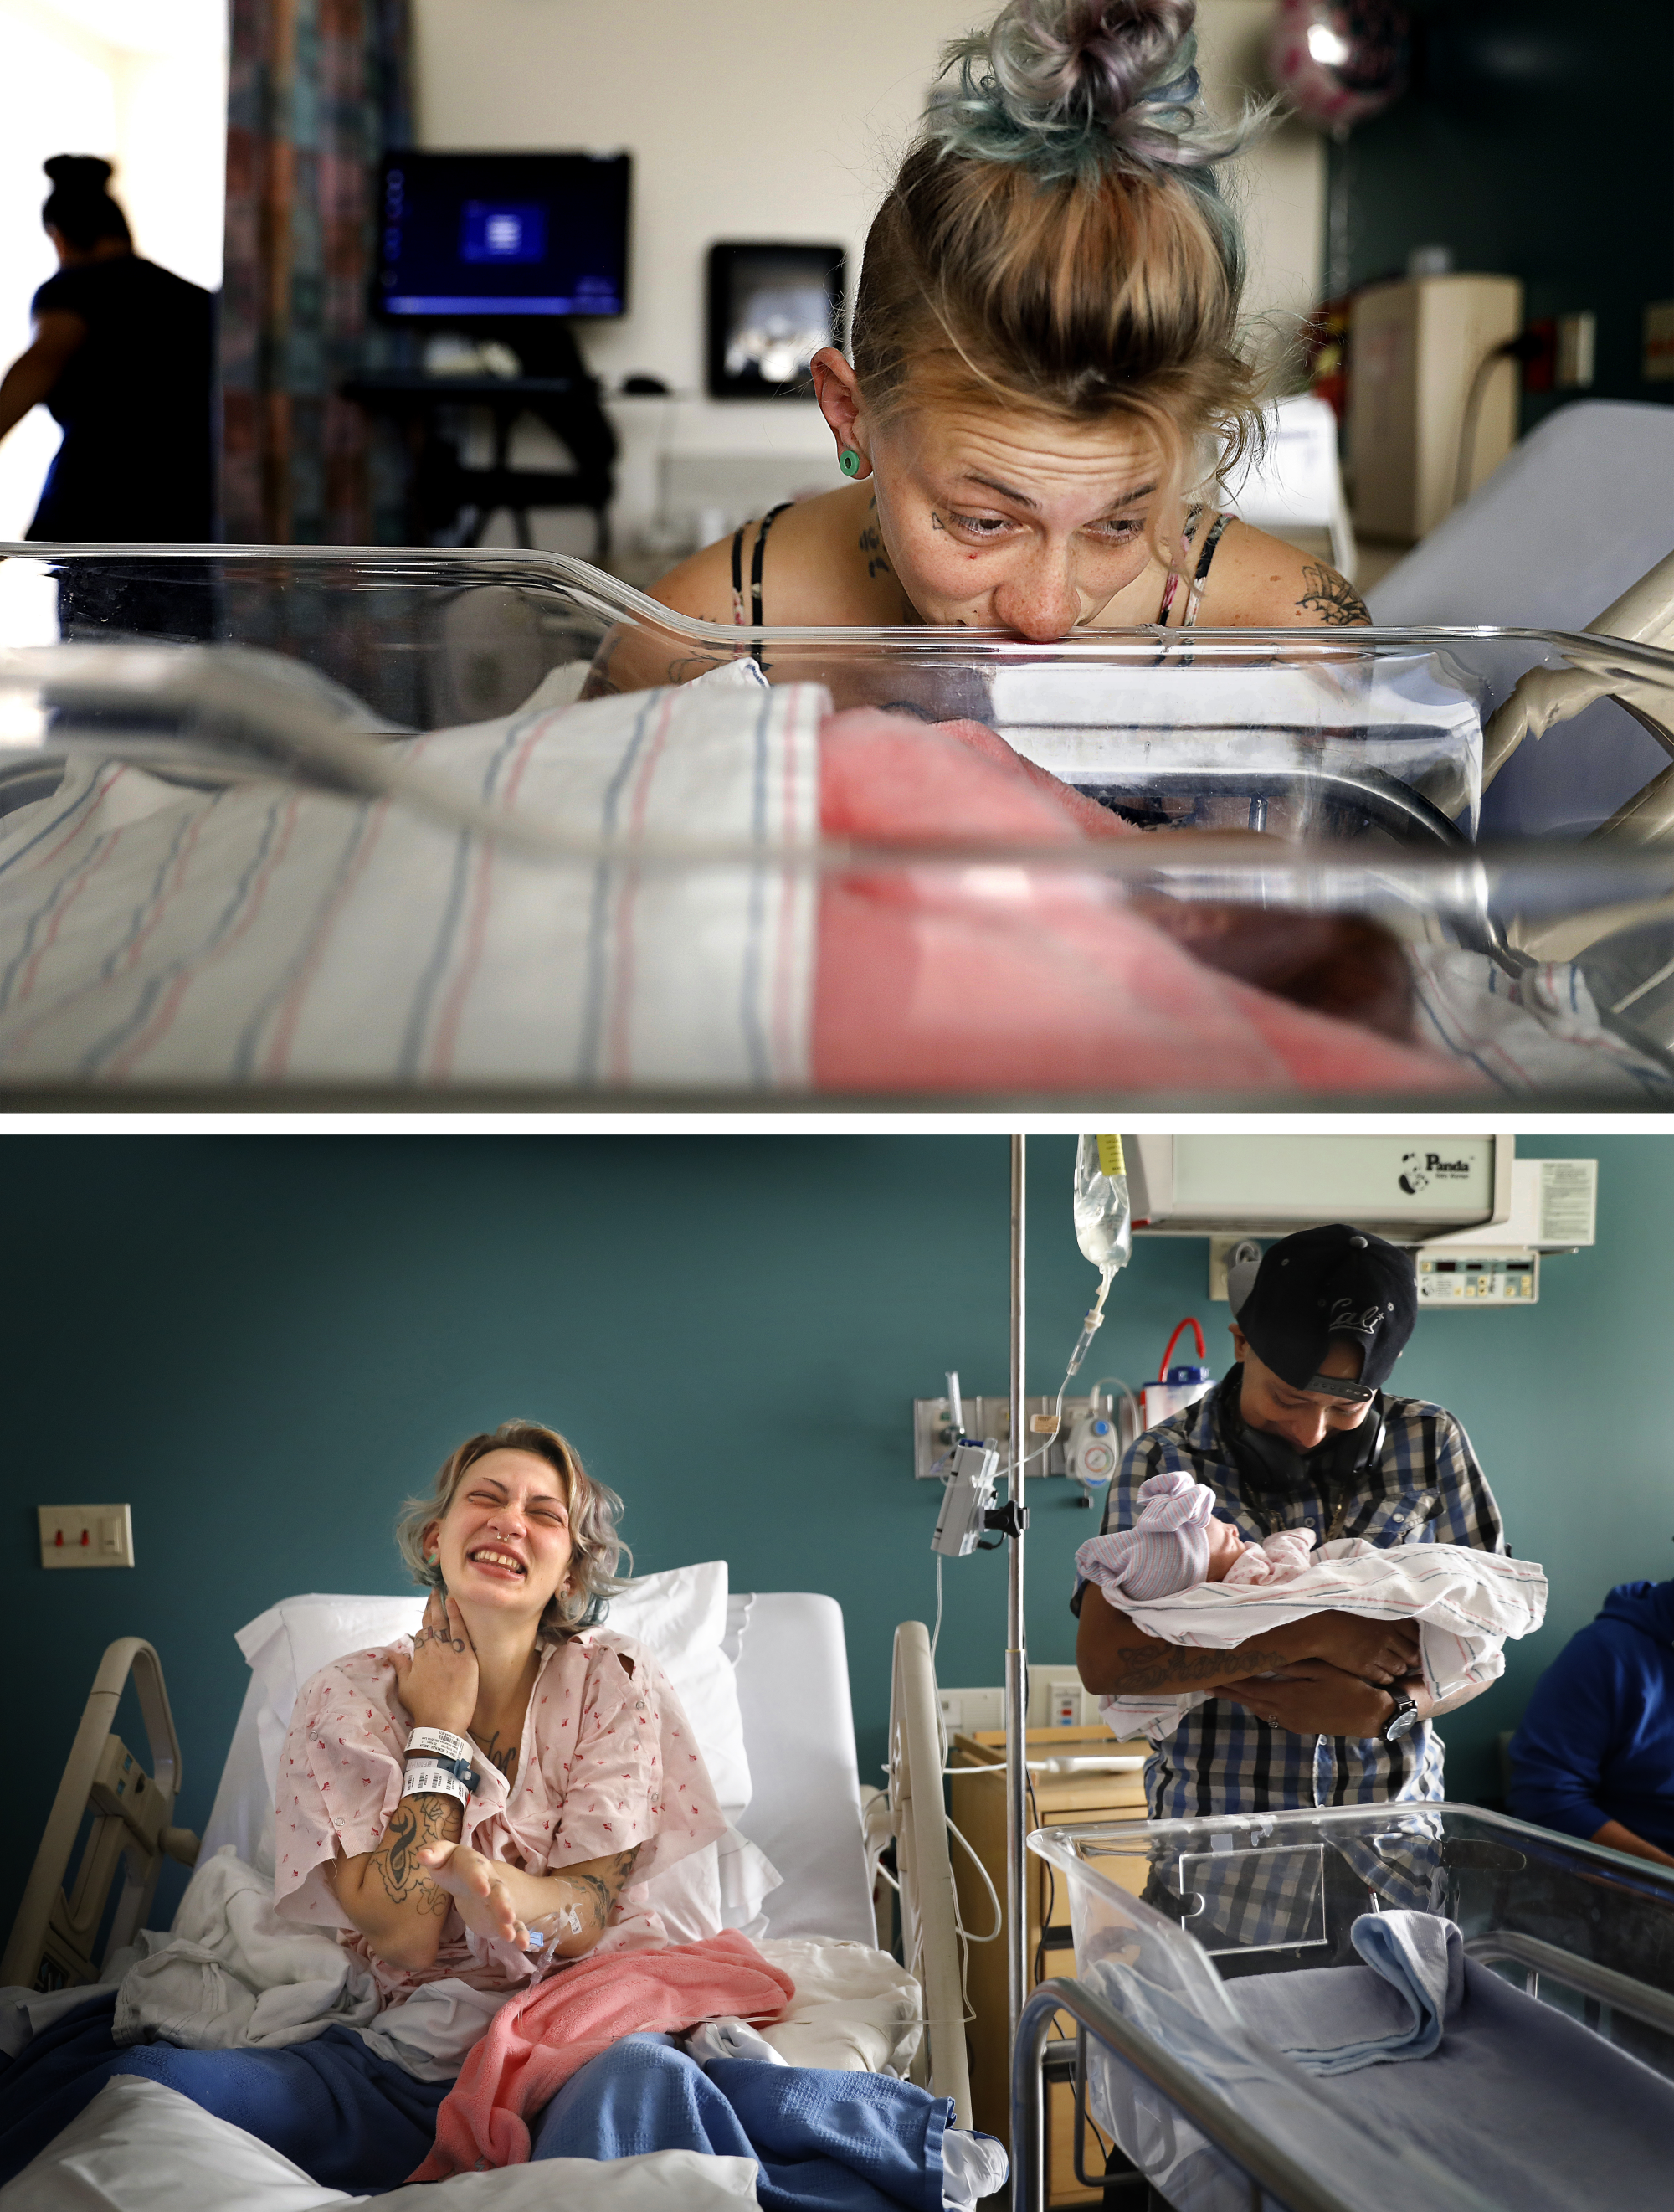 Two photos. A woman looks affectionately at a newborn. A woman in a hospital bed as a woman next to her holds a baby